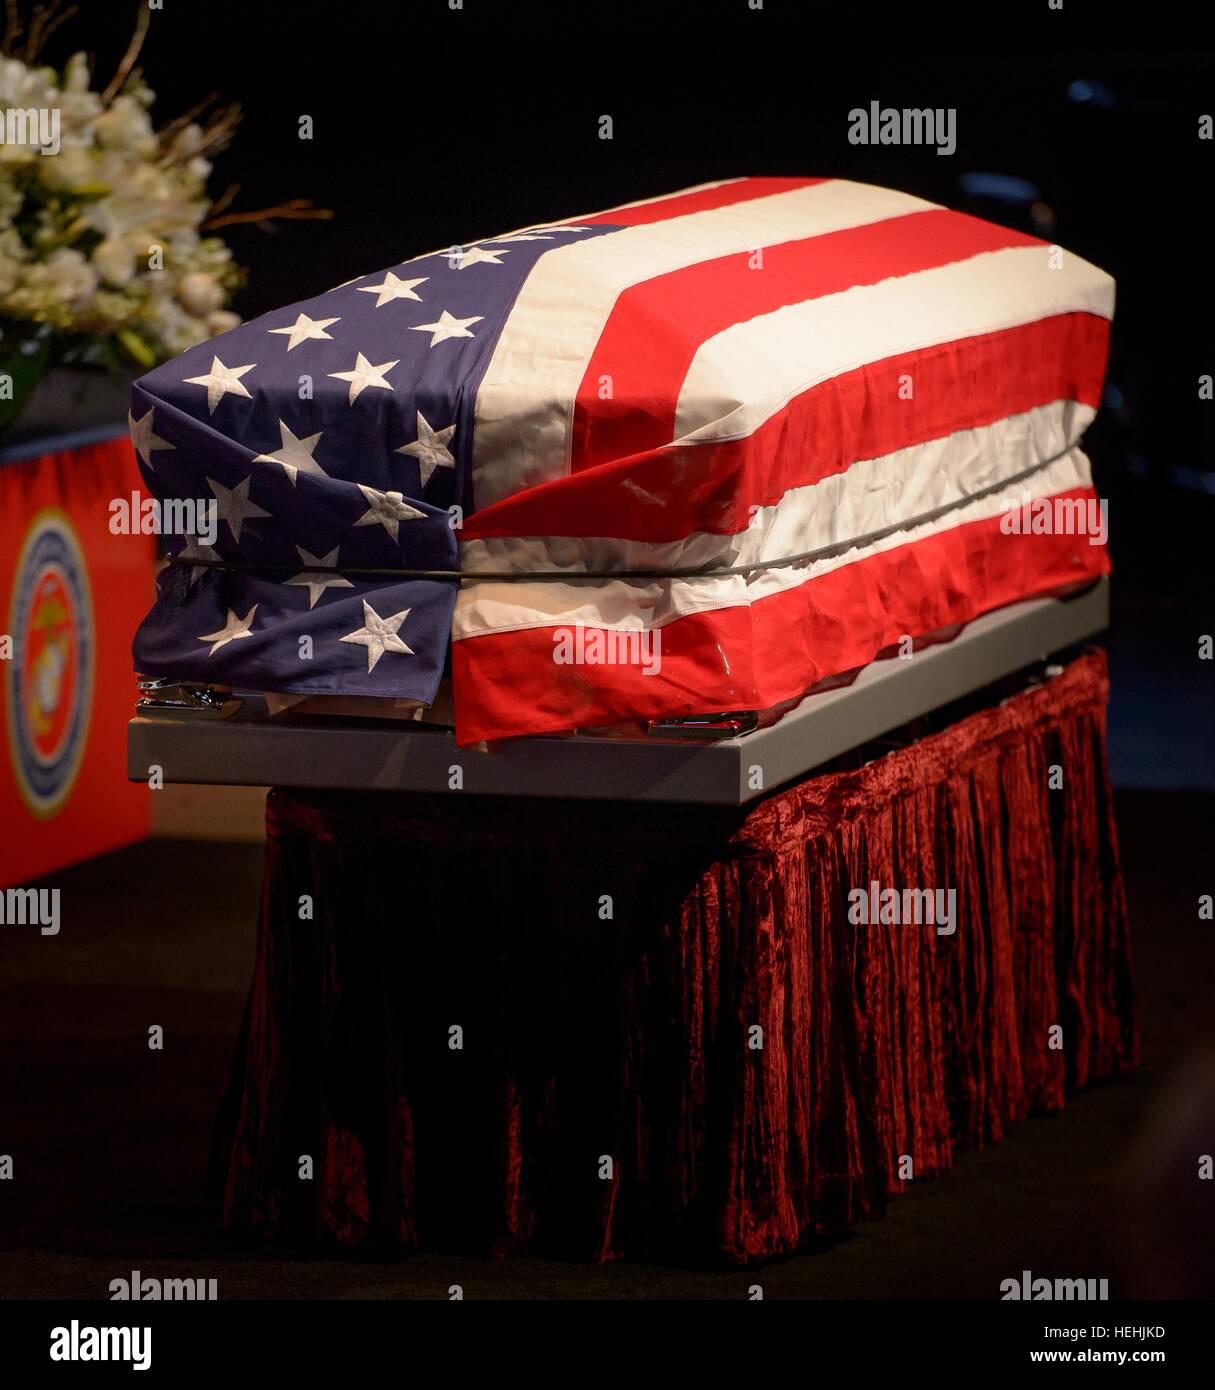 The American flag is draped over the casket of former NASA astronaut and U.S. Senator John Glenn during a memorial service celebrating his life at the Ohio State University Mershon Auditorium December 17, 2016 in Columbus, Ohio. Stock Photo